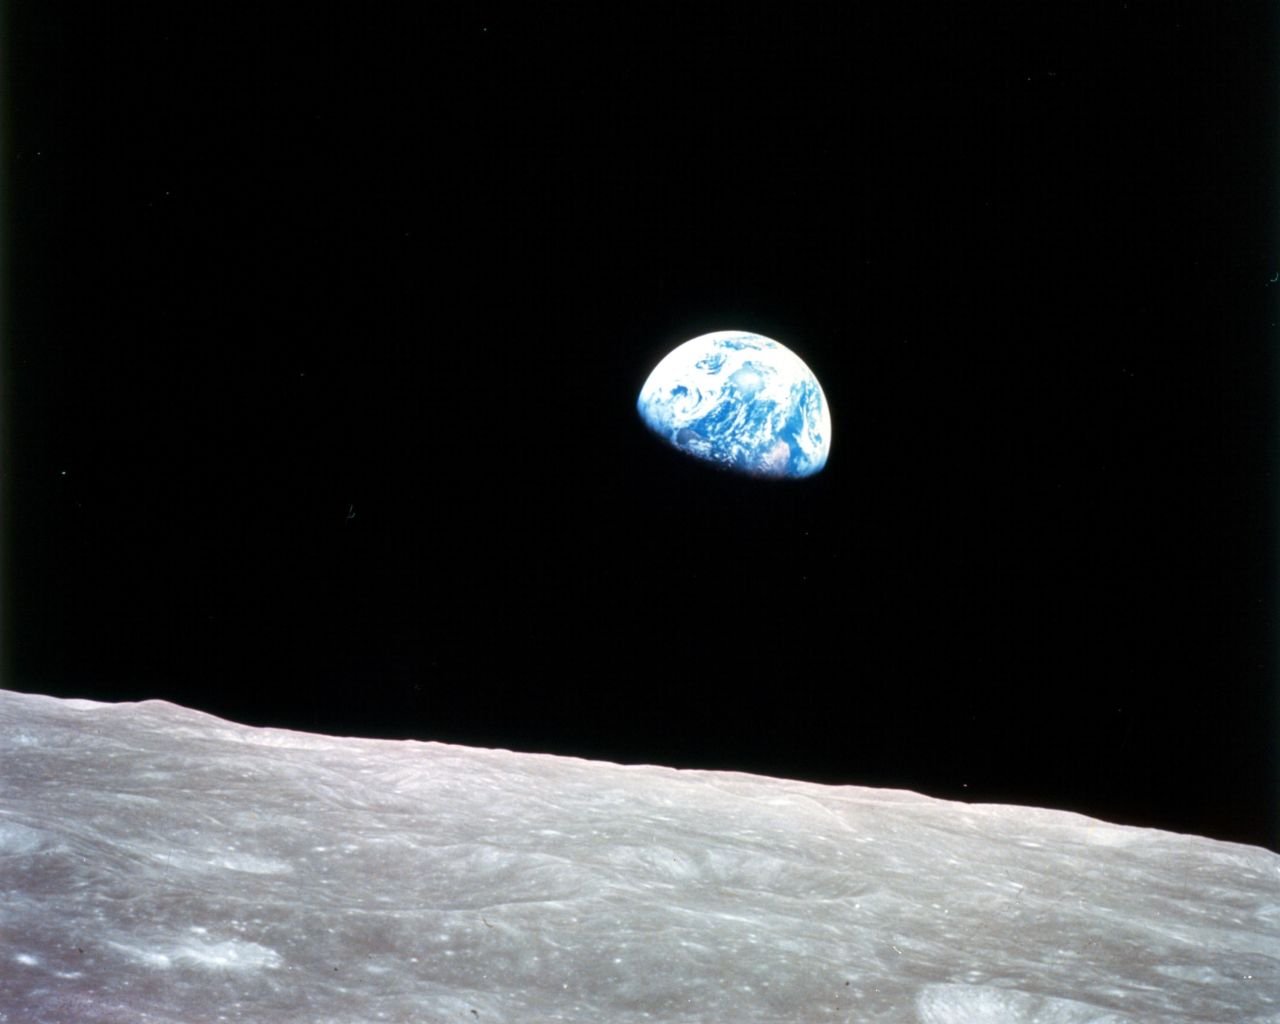 Apollo 8 launched on December 21, 1968, and entered lunar orbit on Christmas Eve. That night, the crew held a live broadcast and showed pictures of the Earth from their spacecraft. "The vast loneliness is awe-inspiring and it makes you realize just what you have back there on Earth," Lovell said. They ended the broadcast taking turns reading from the Book of Genesis.